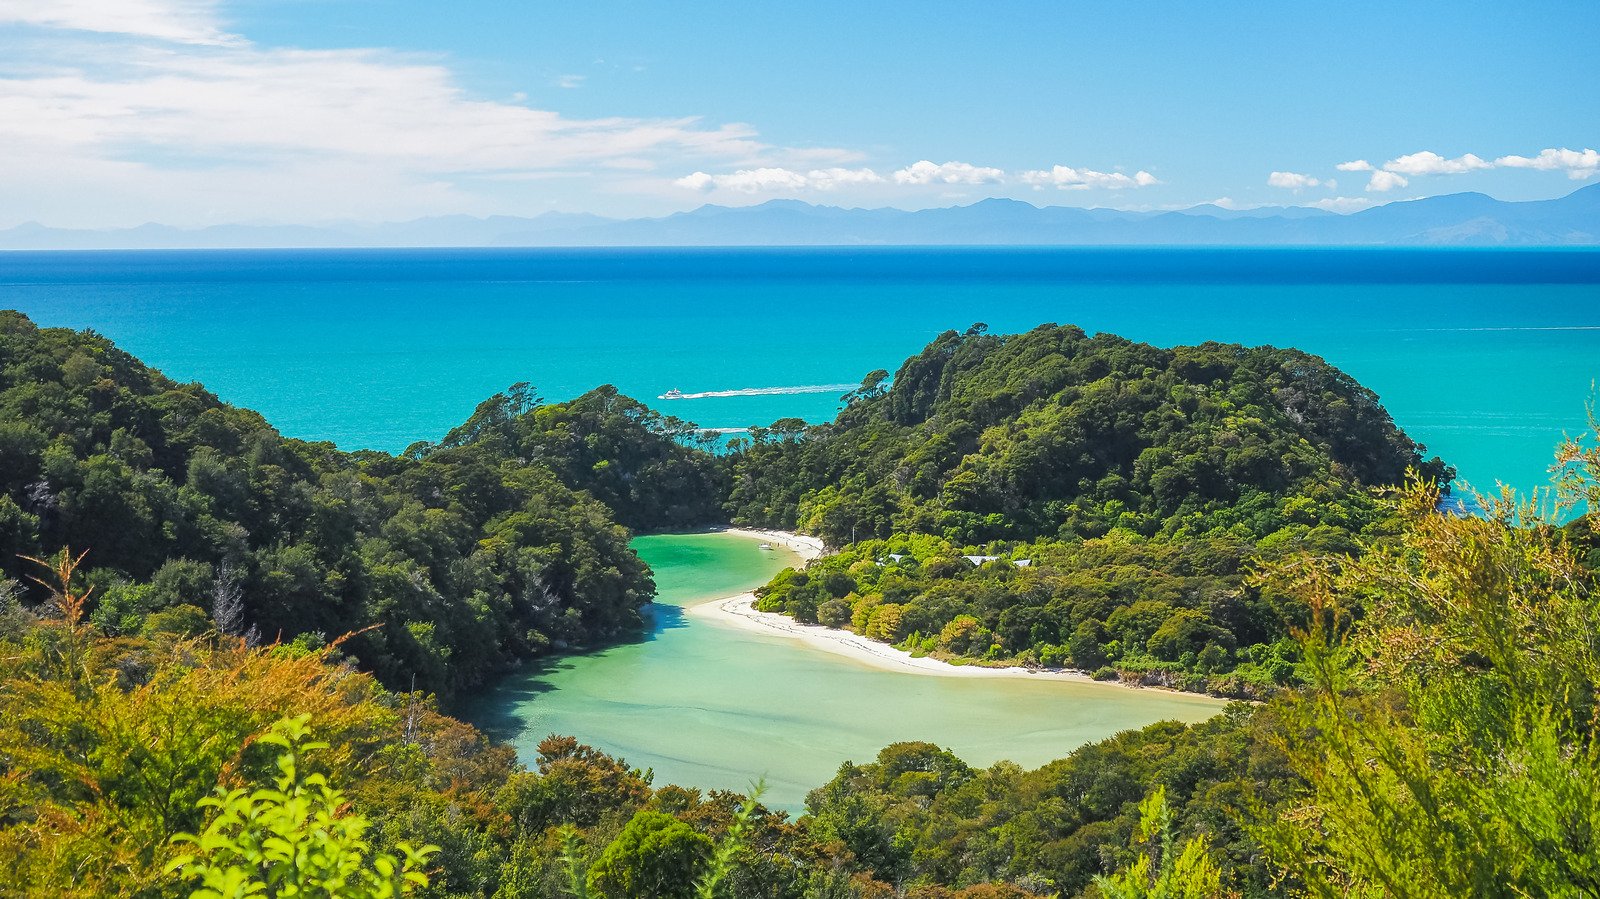 Take In All The Beauty Of This New Zealand National Park On Its World-Famous Trail